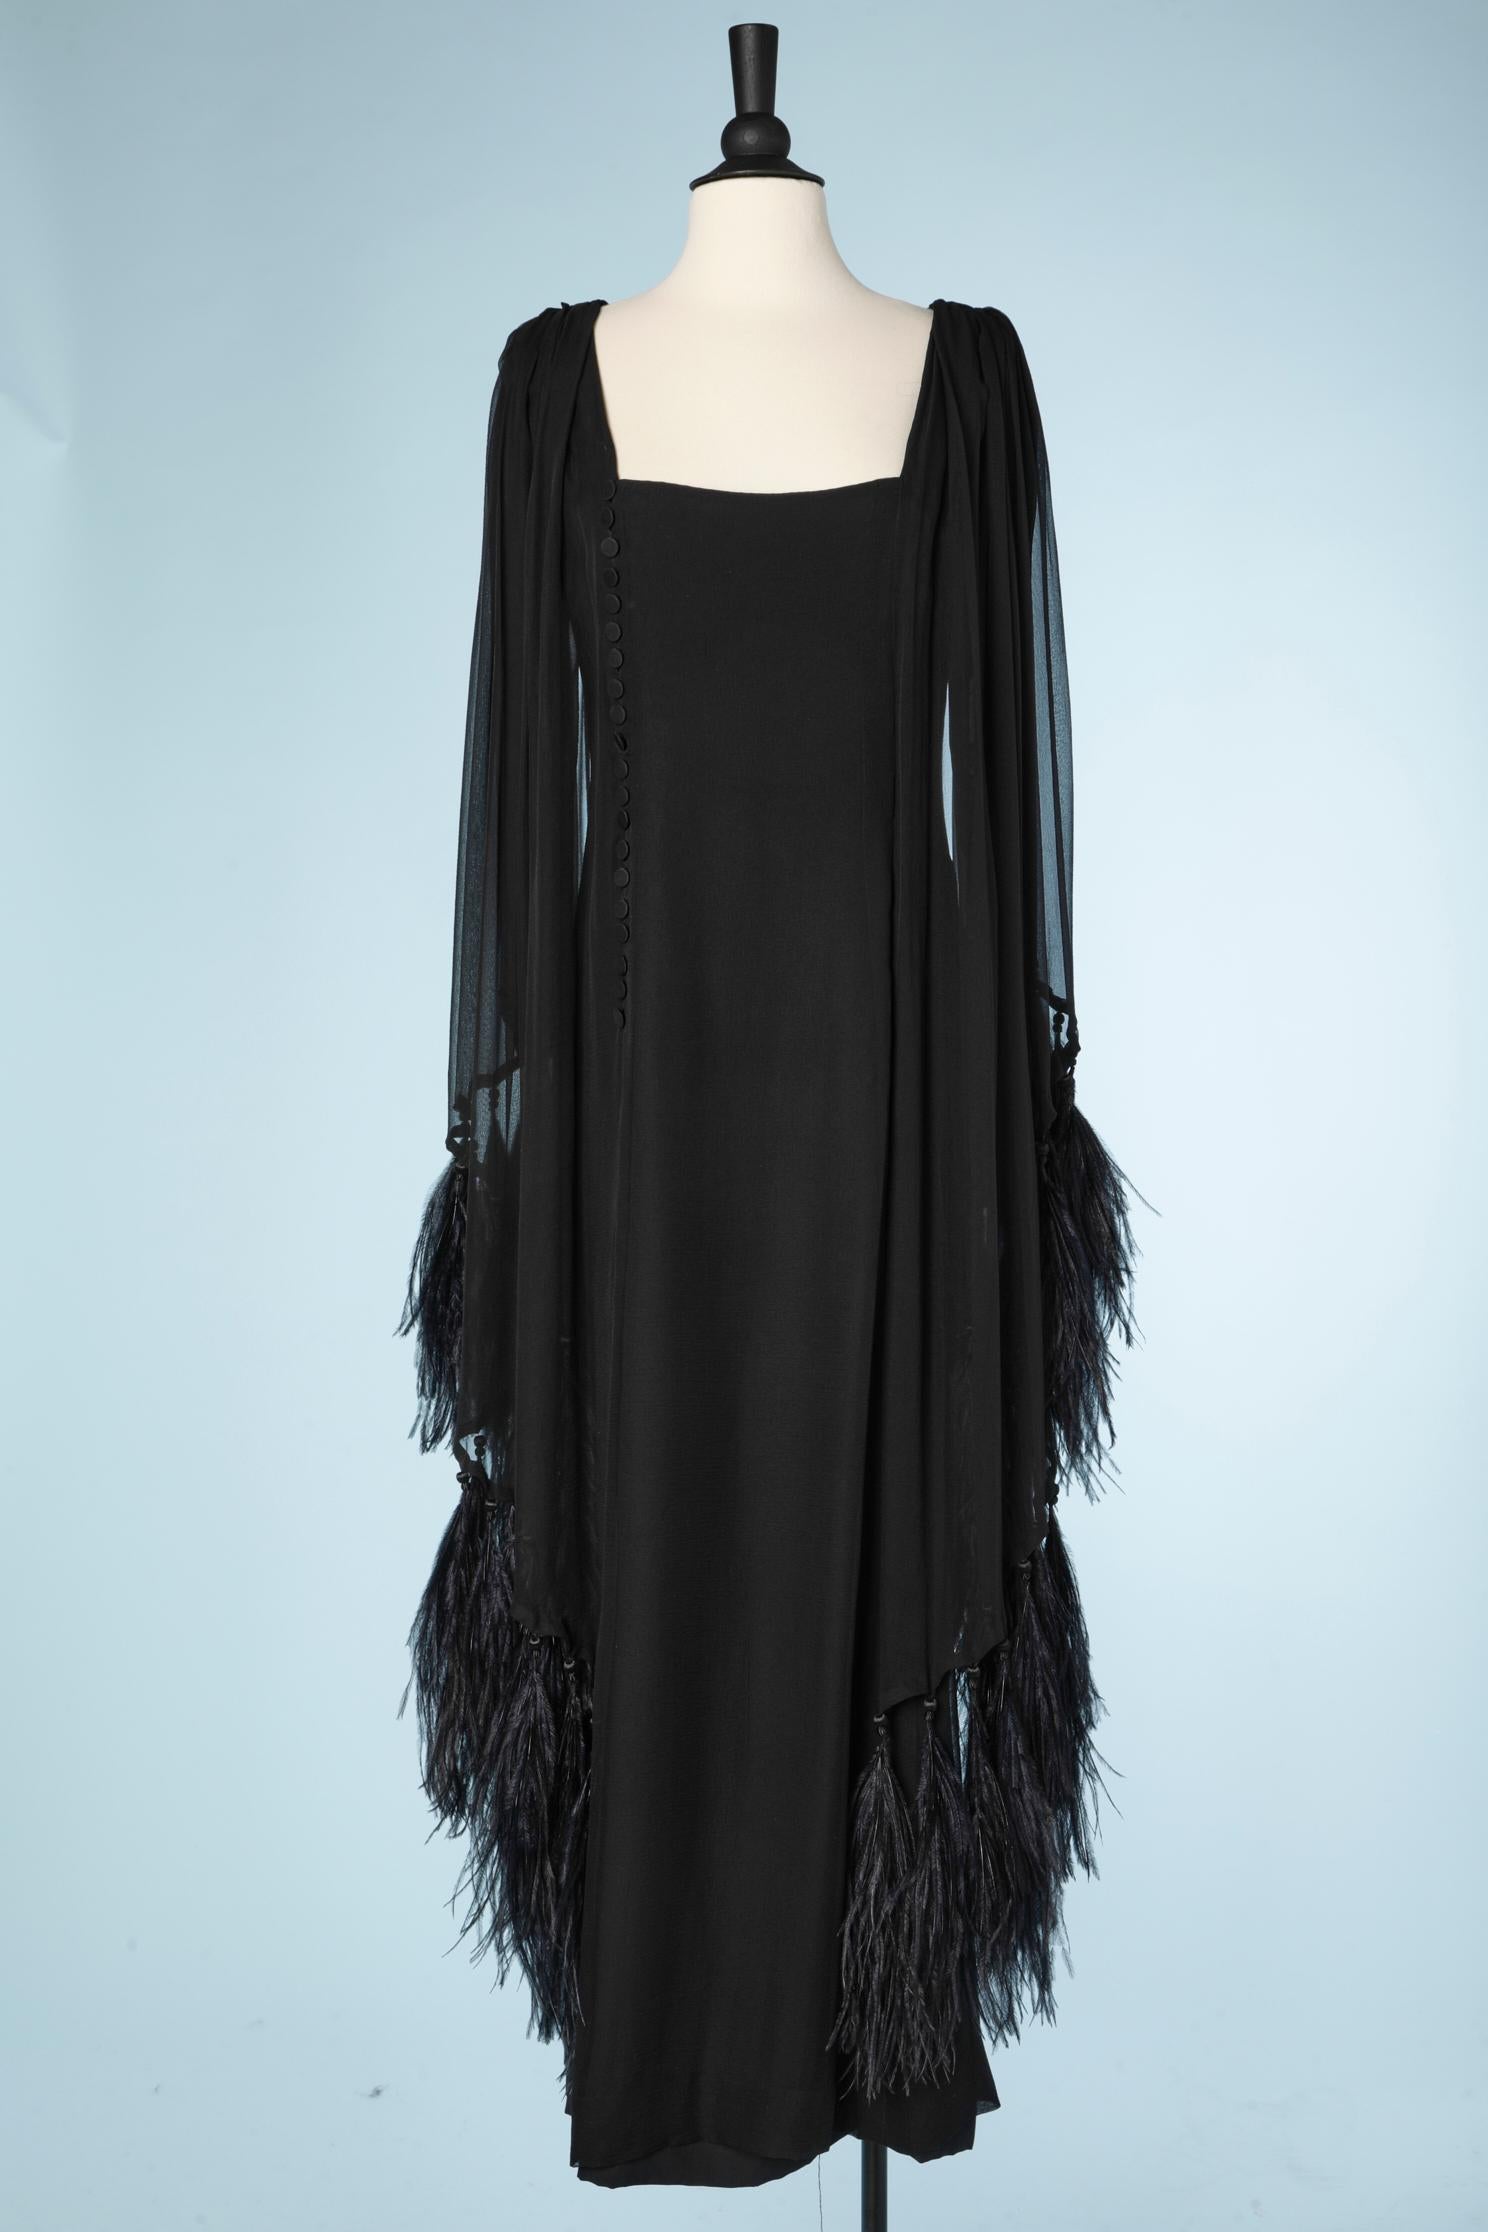 Black silk chiffon evening dress with feathers edge. Fabric bottons and zip ( under the button placket) Fabric  Buttons at the end of the sleeves. A small ball of trimming is attached to each strand of feathers. 
SIZE L 
Please note that the dress